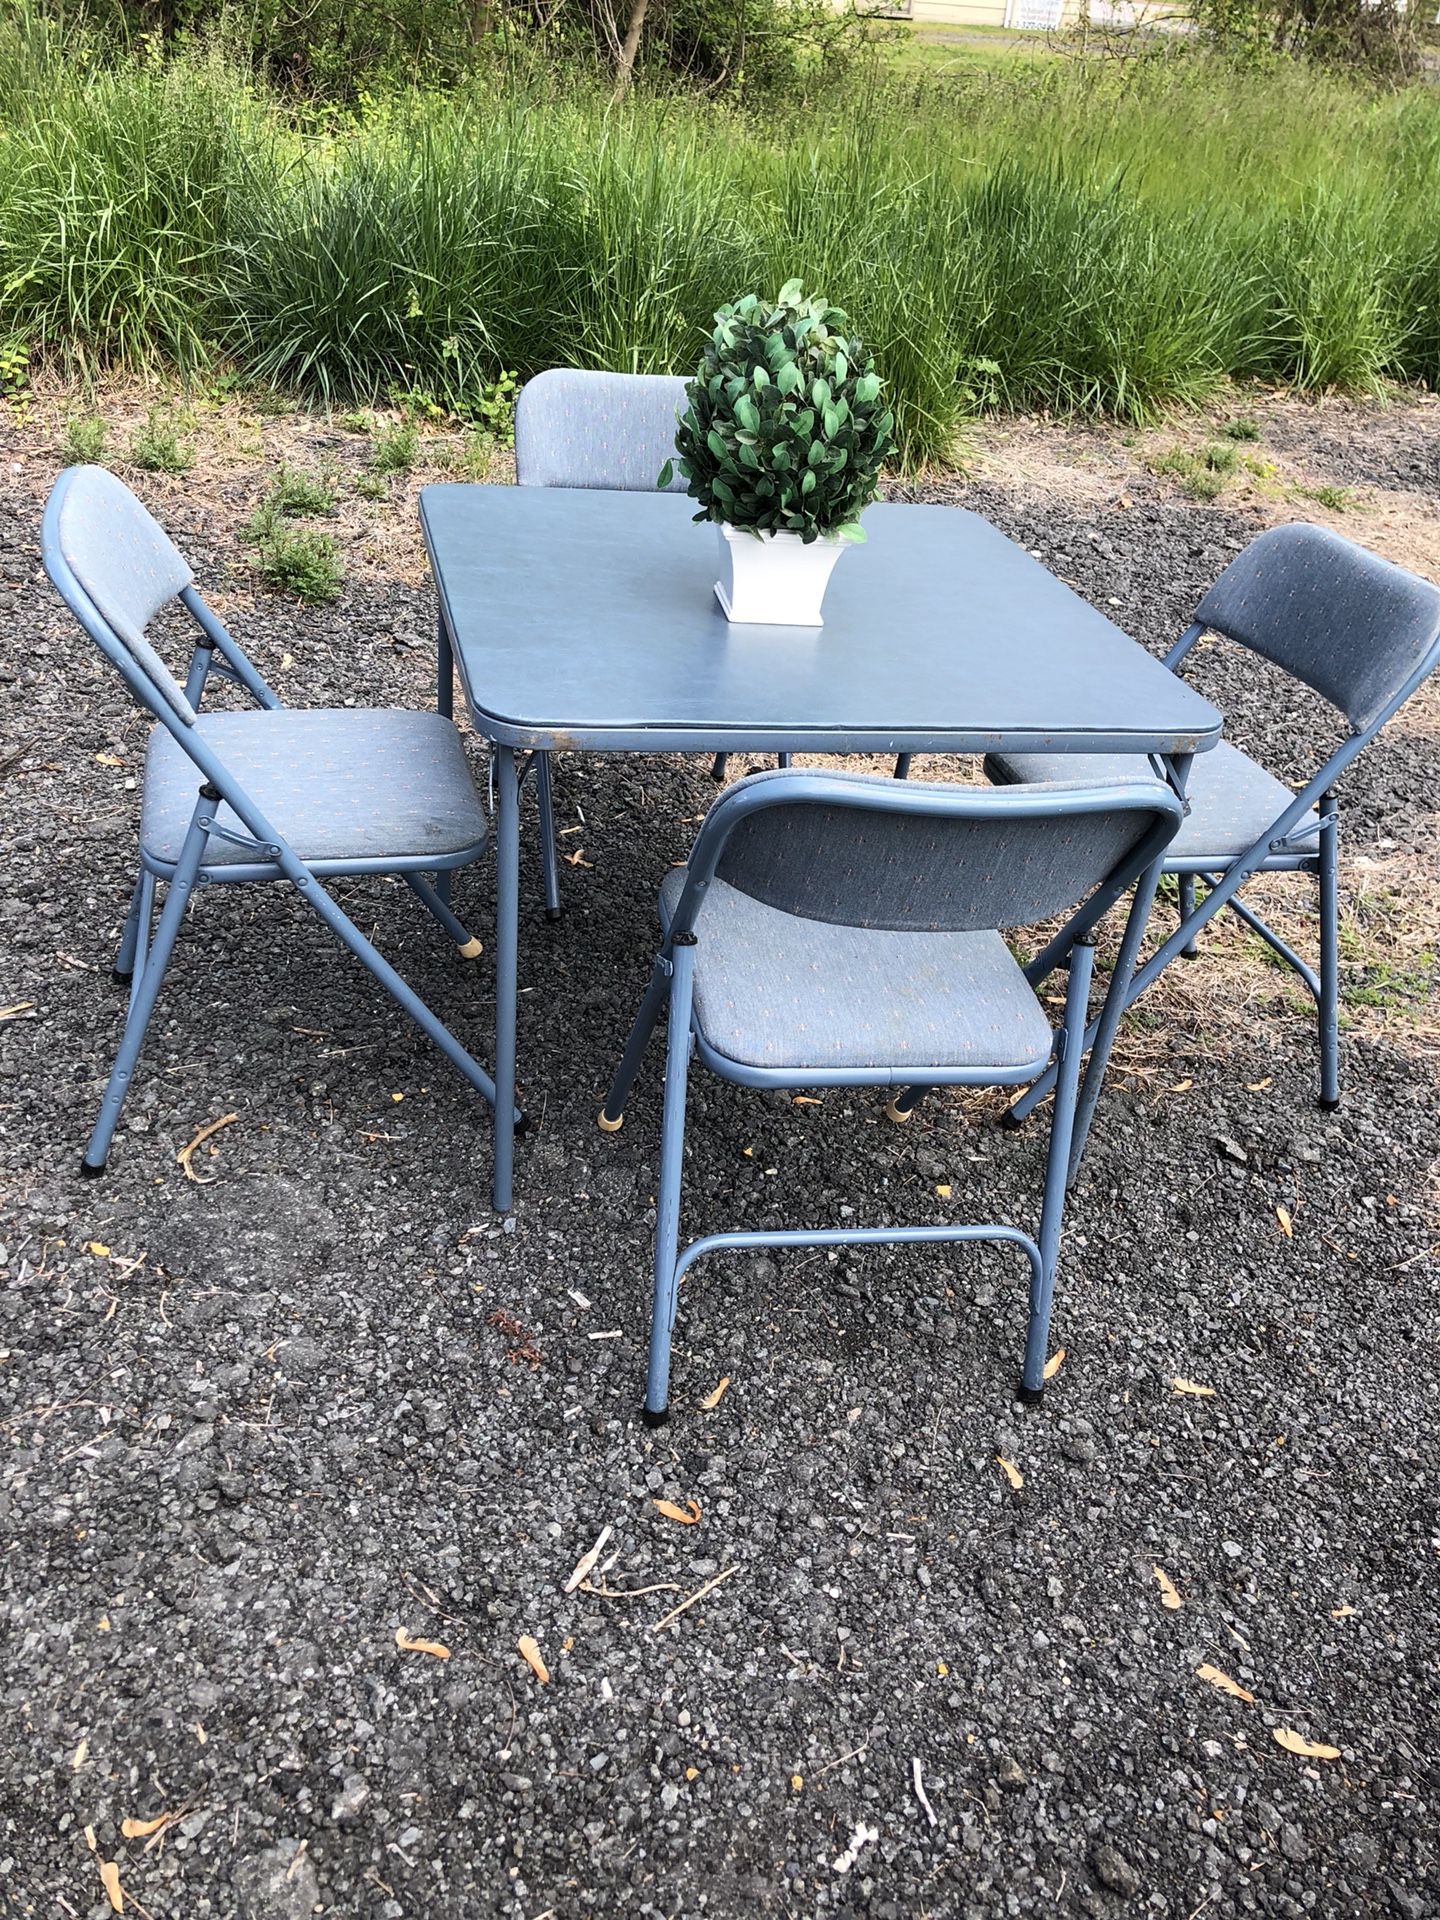 Metal chairs and table